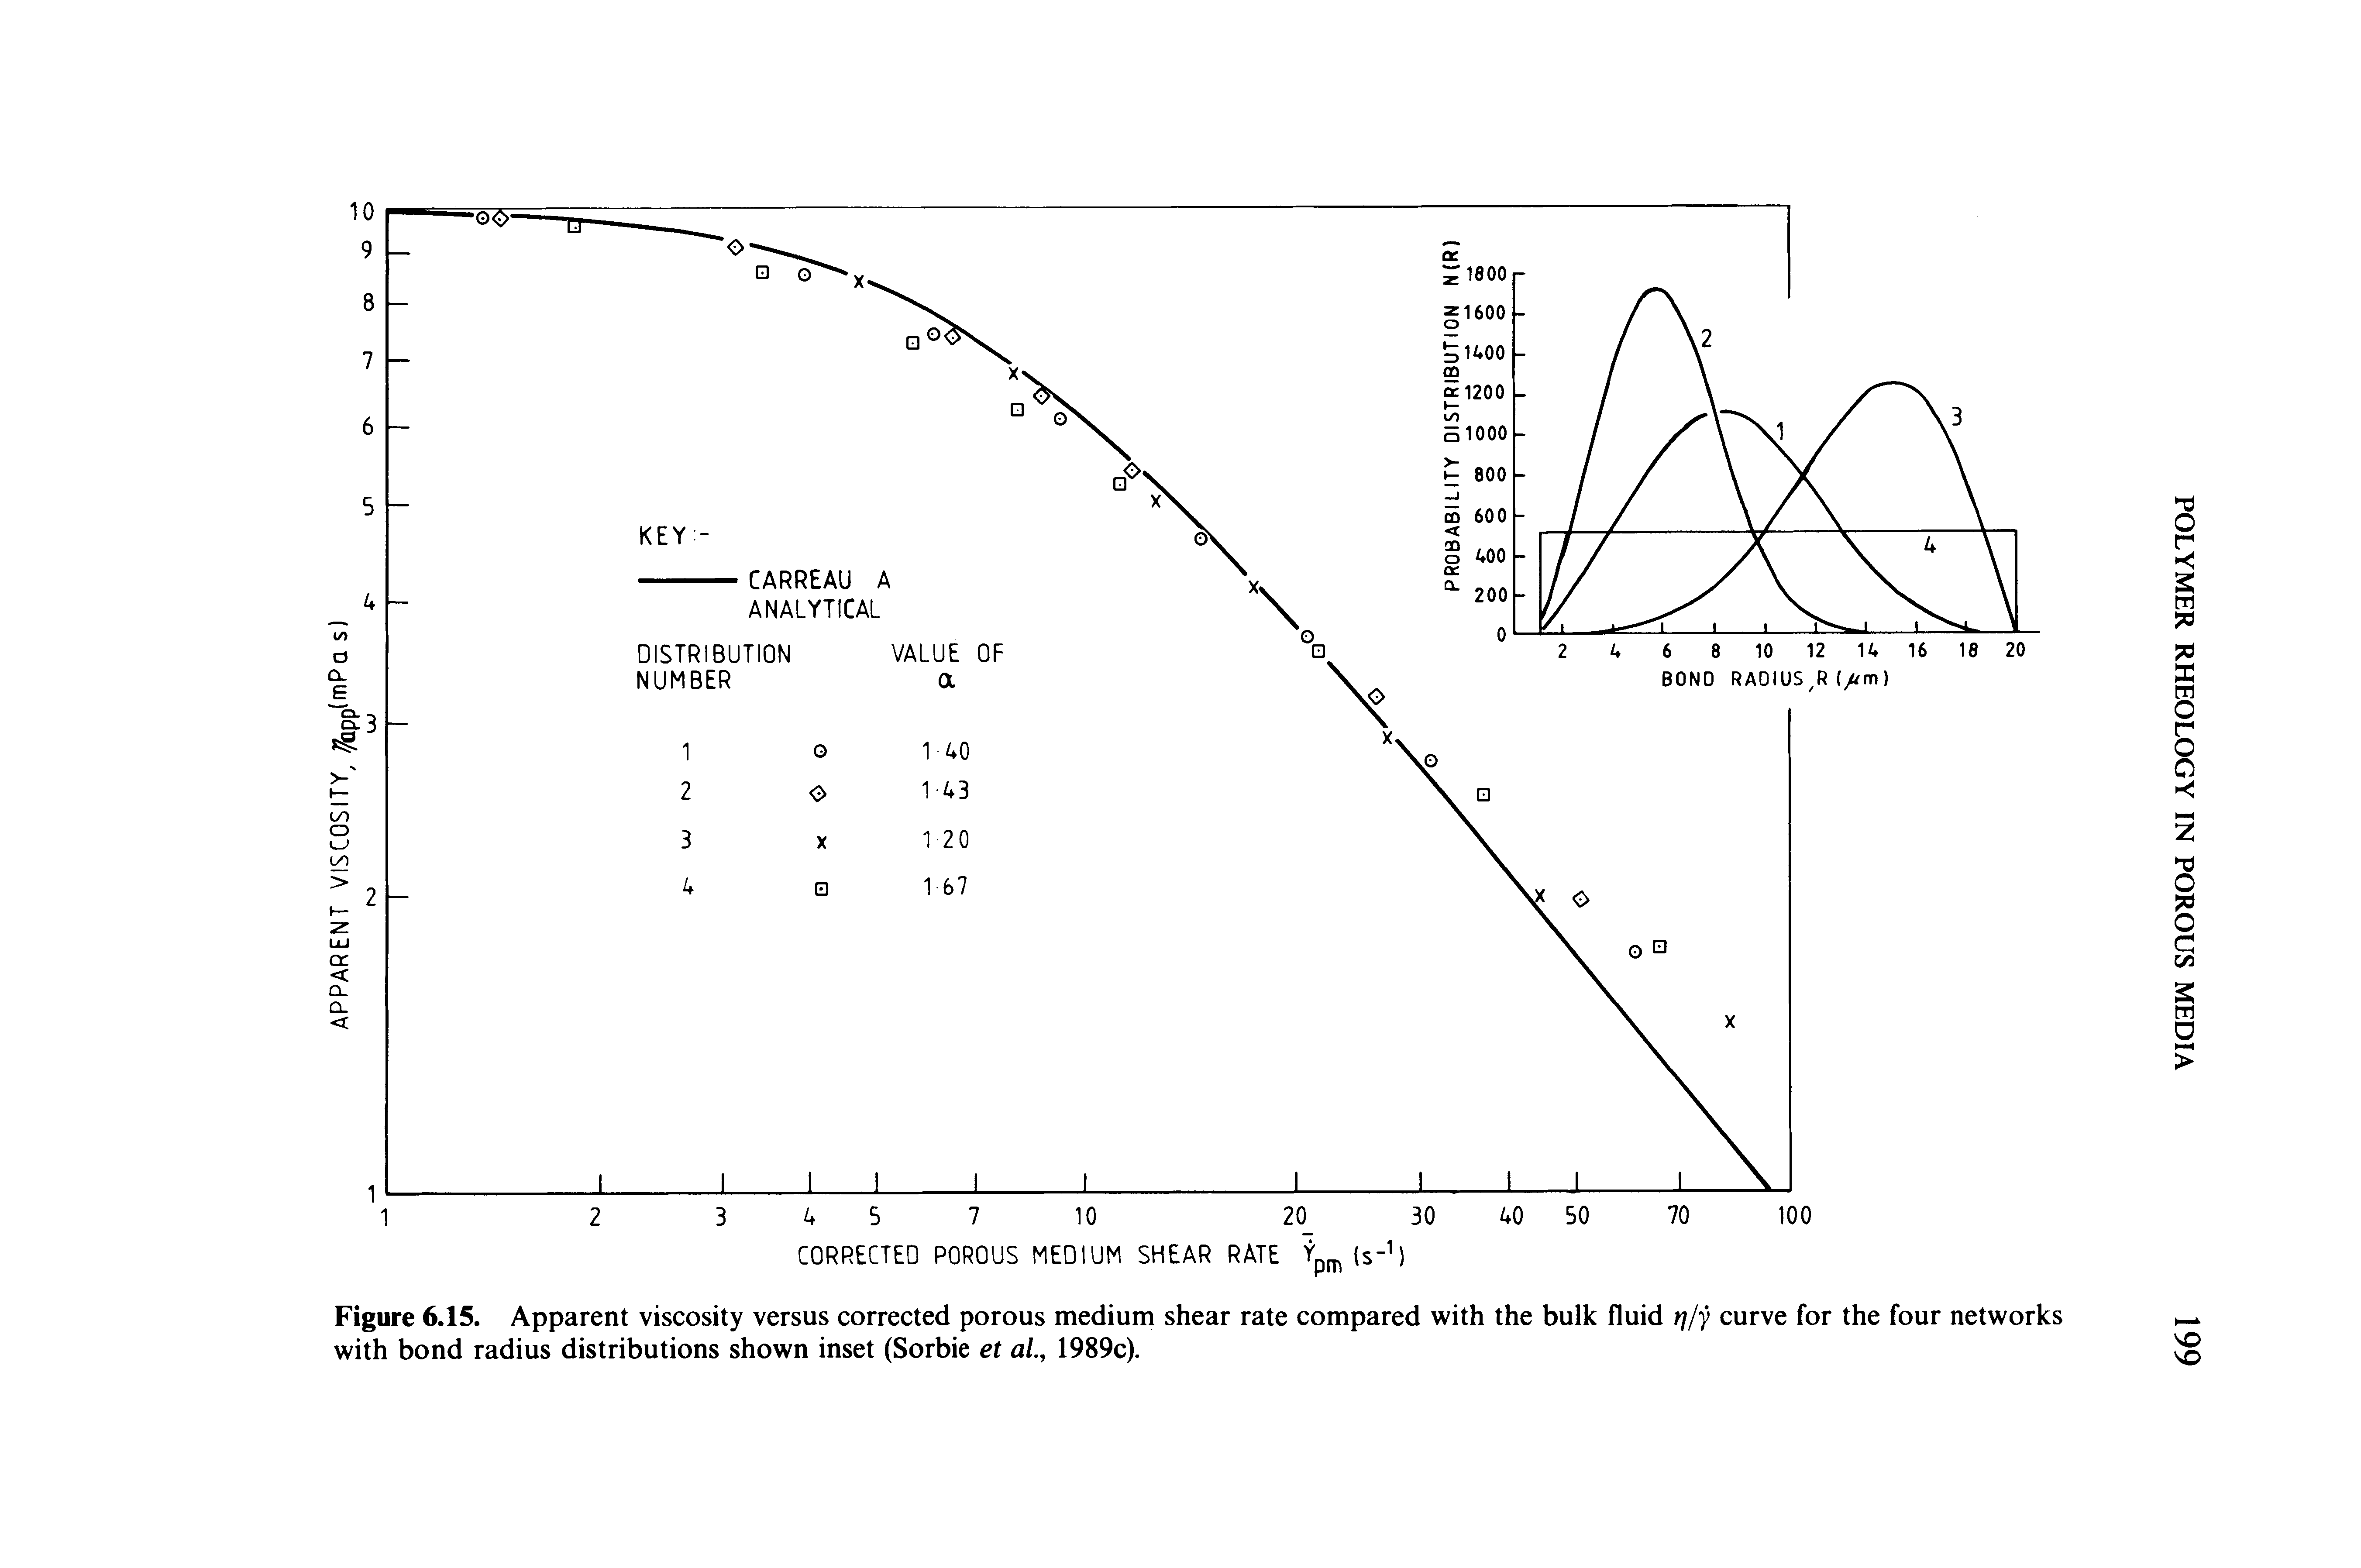 Figure 6.15. Apparent viscosity versus corrected porous medium shear rate compared with the bulk fluid rj/y curve for the four networks with bond radius distributions shown inset (Sorbie et ai, 1989c).